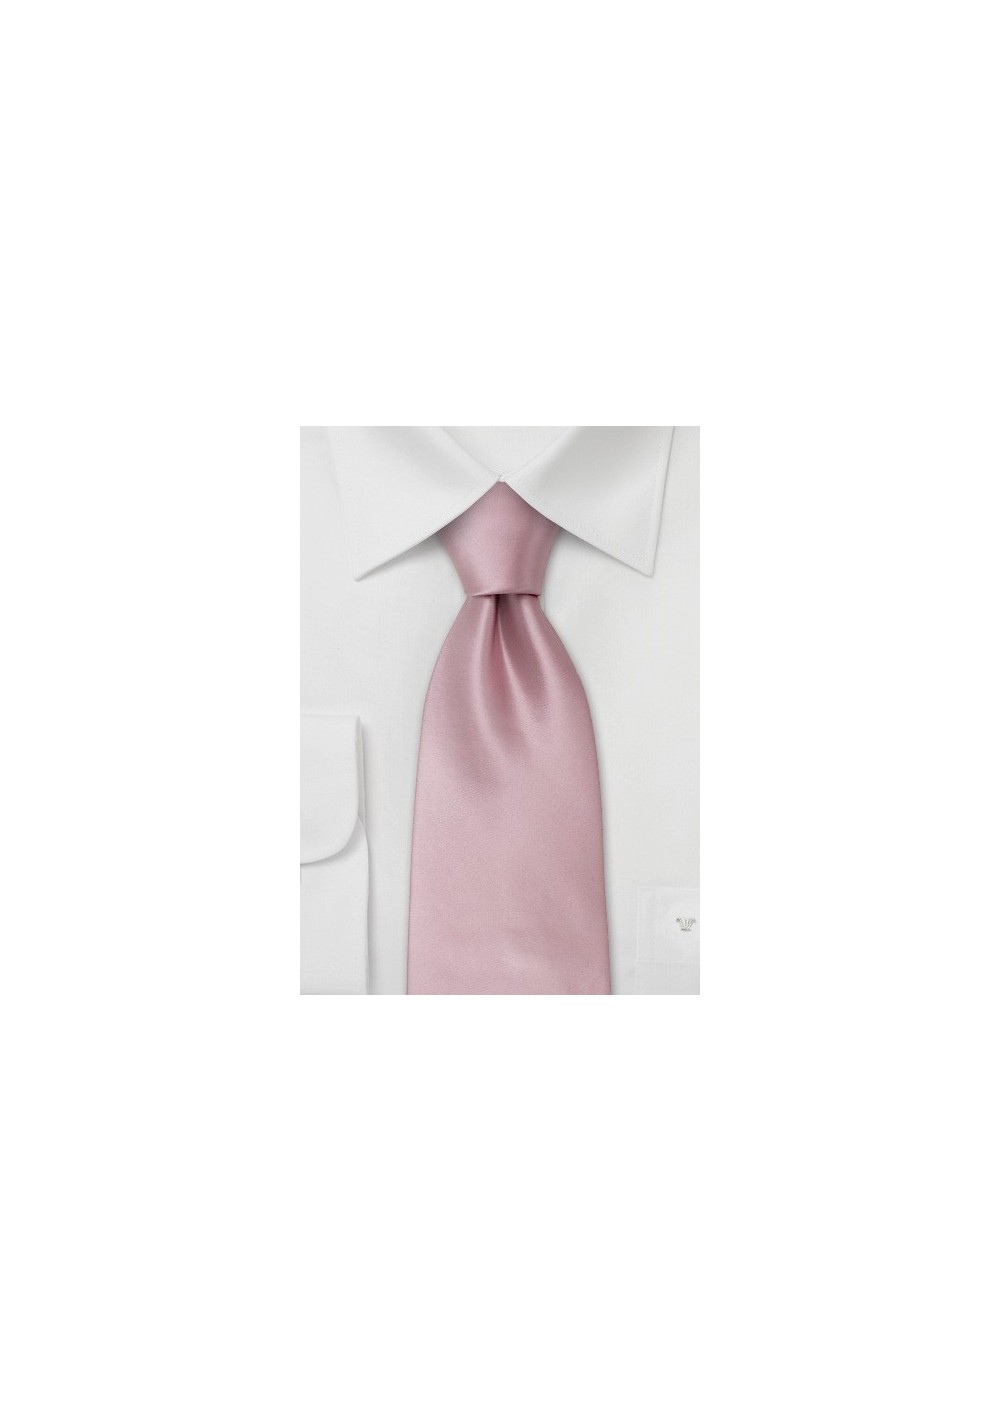 Festive pink colored tie